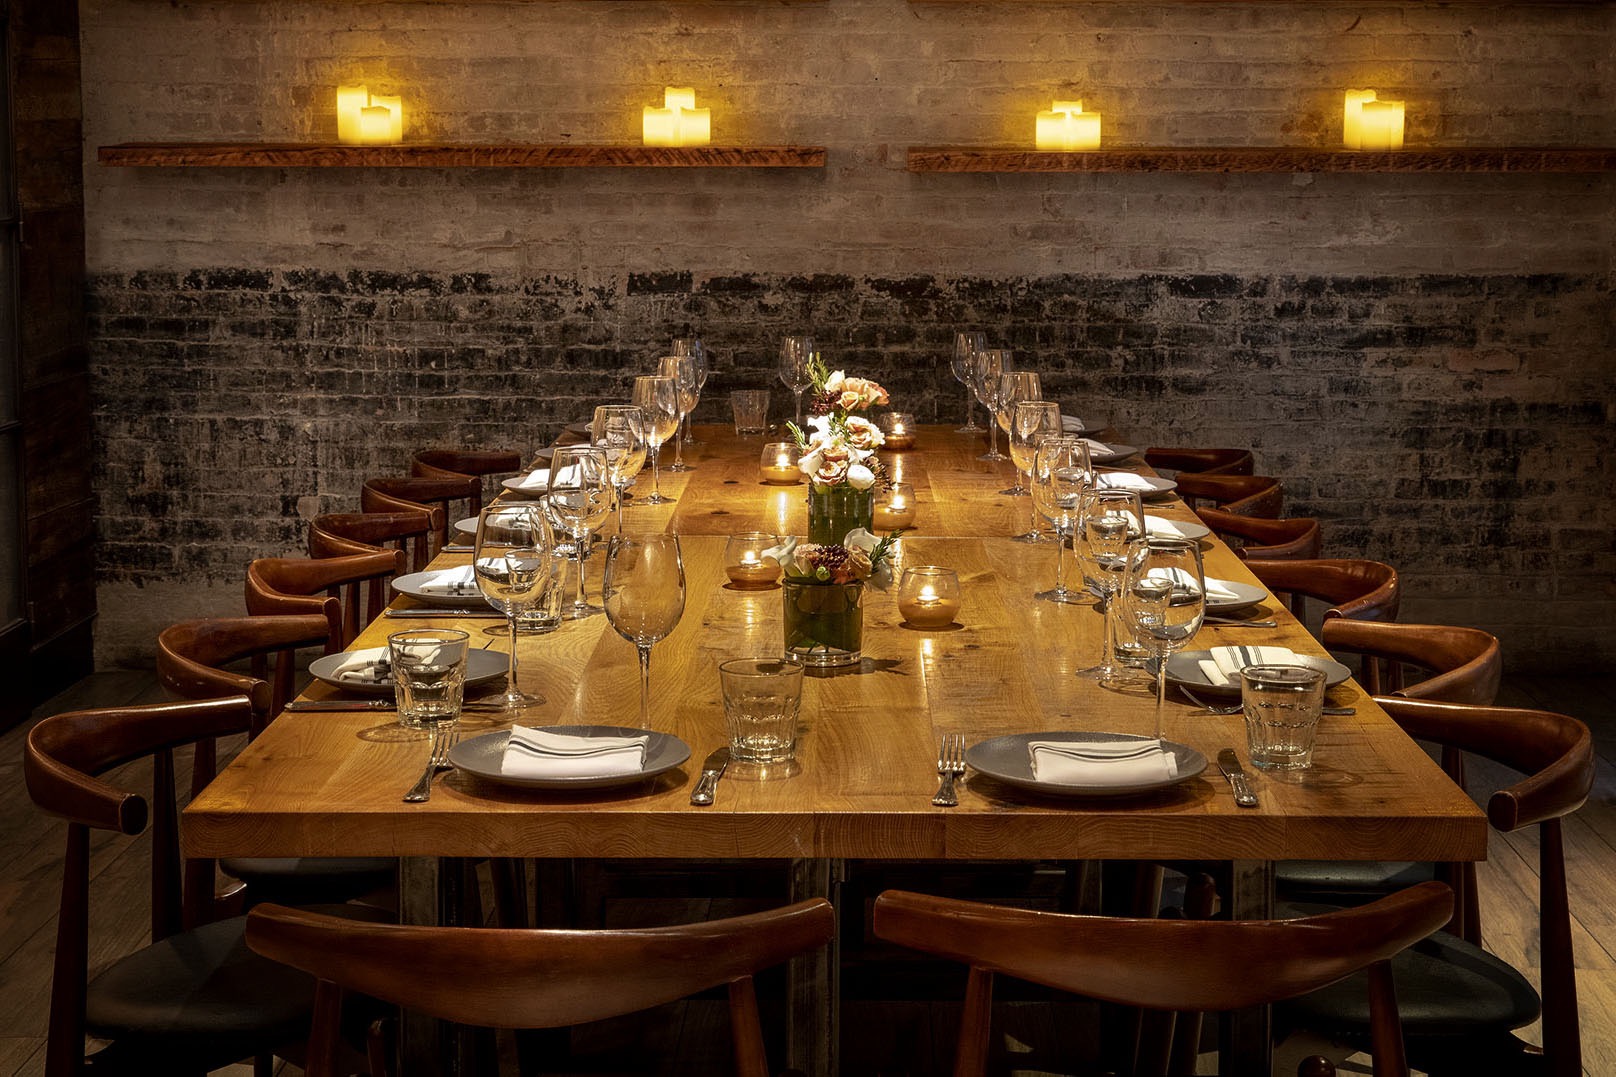 A dining table in a private dining room at the restaurant Covina.